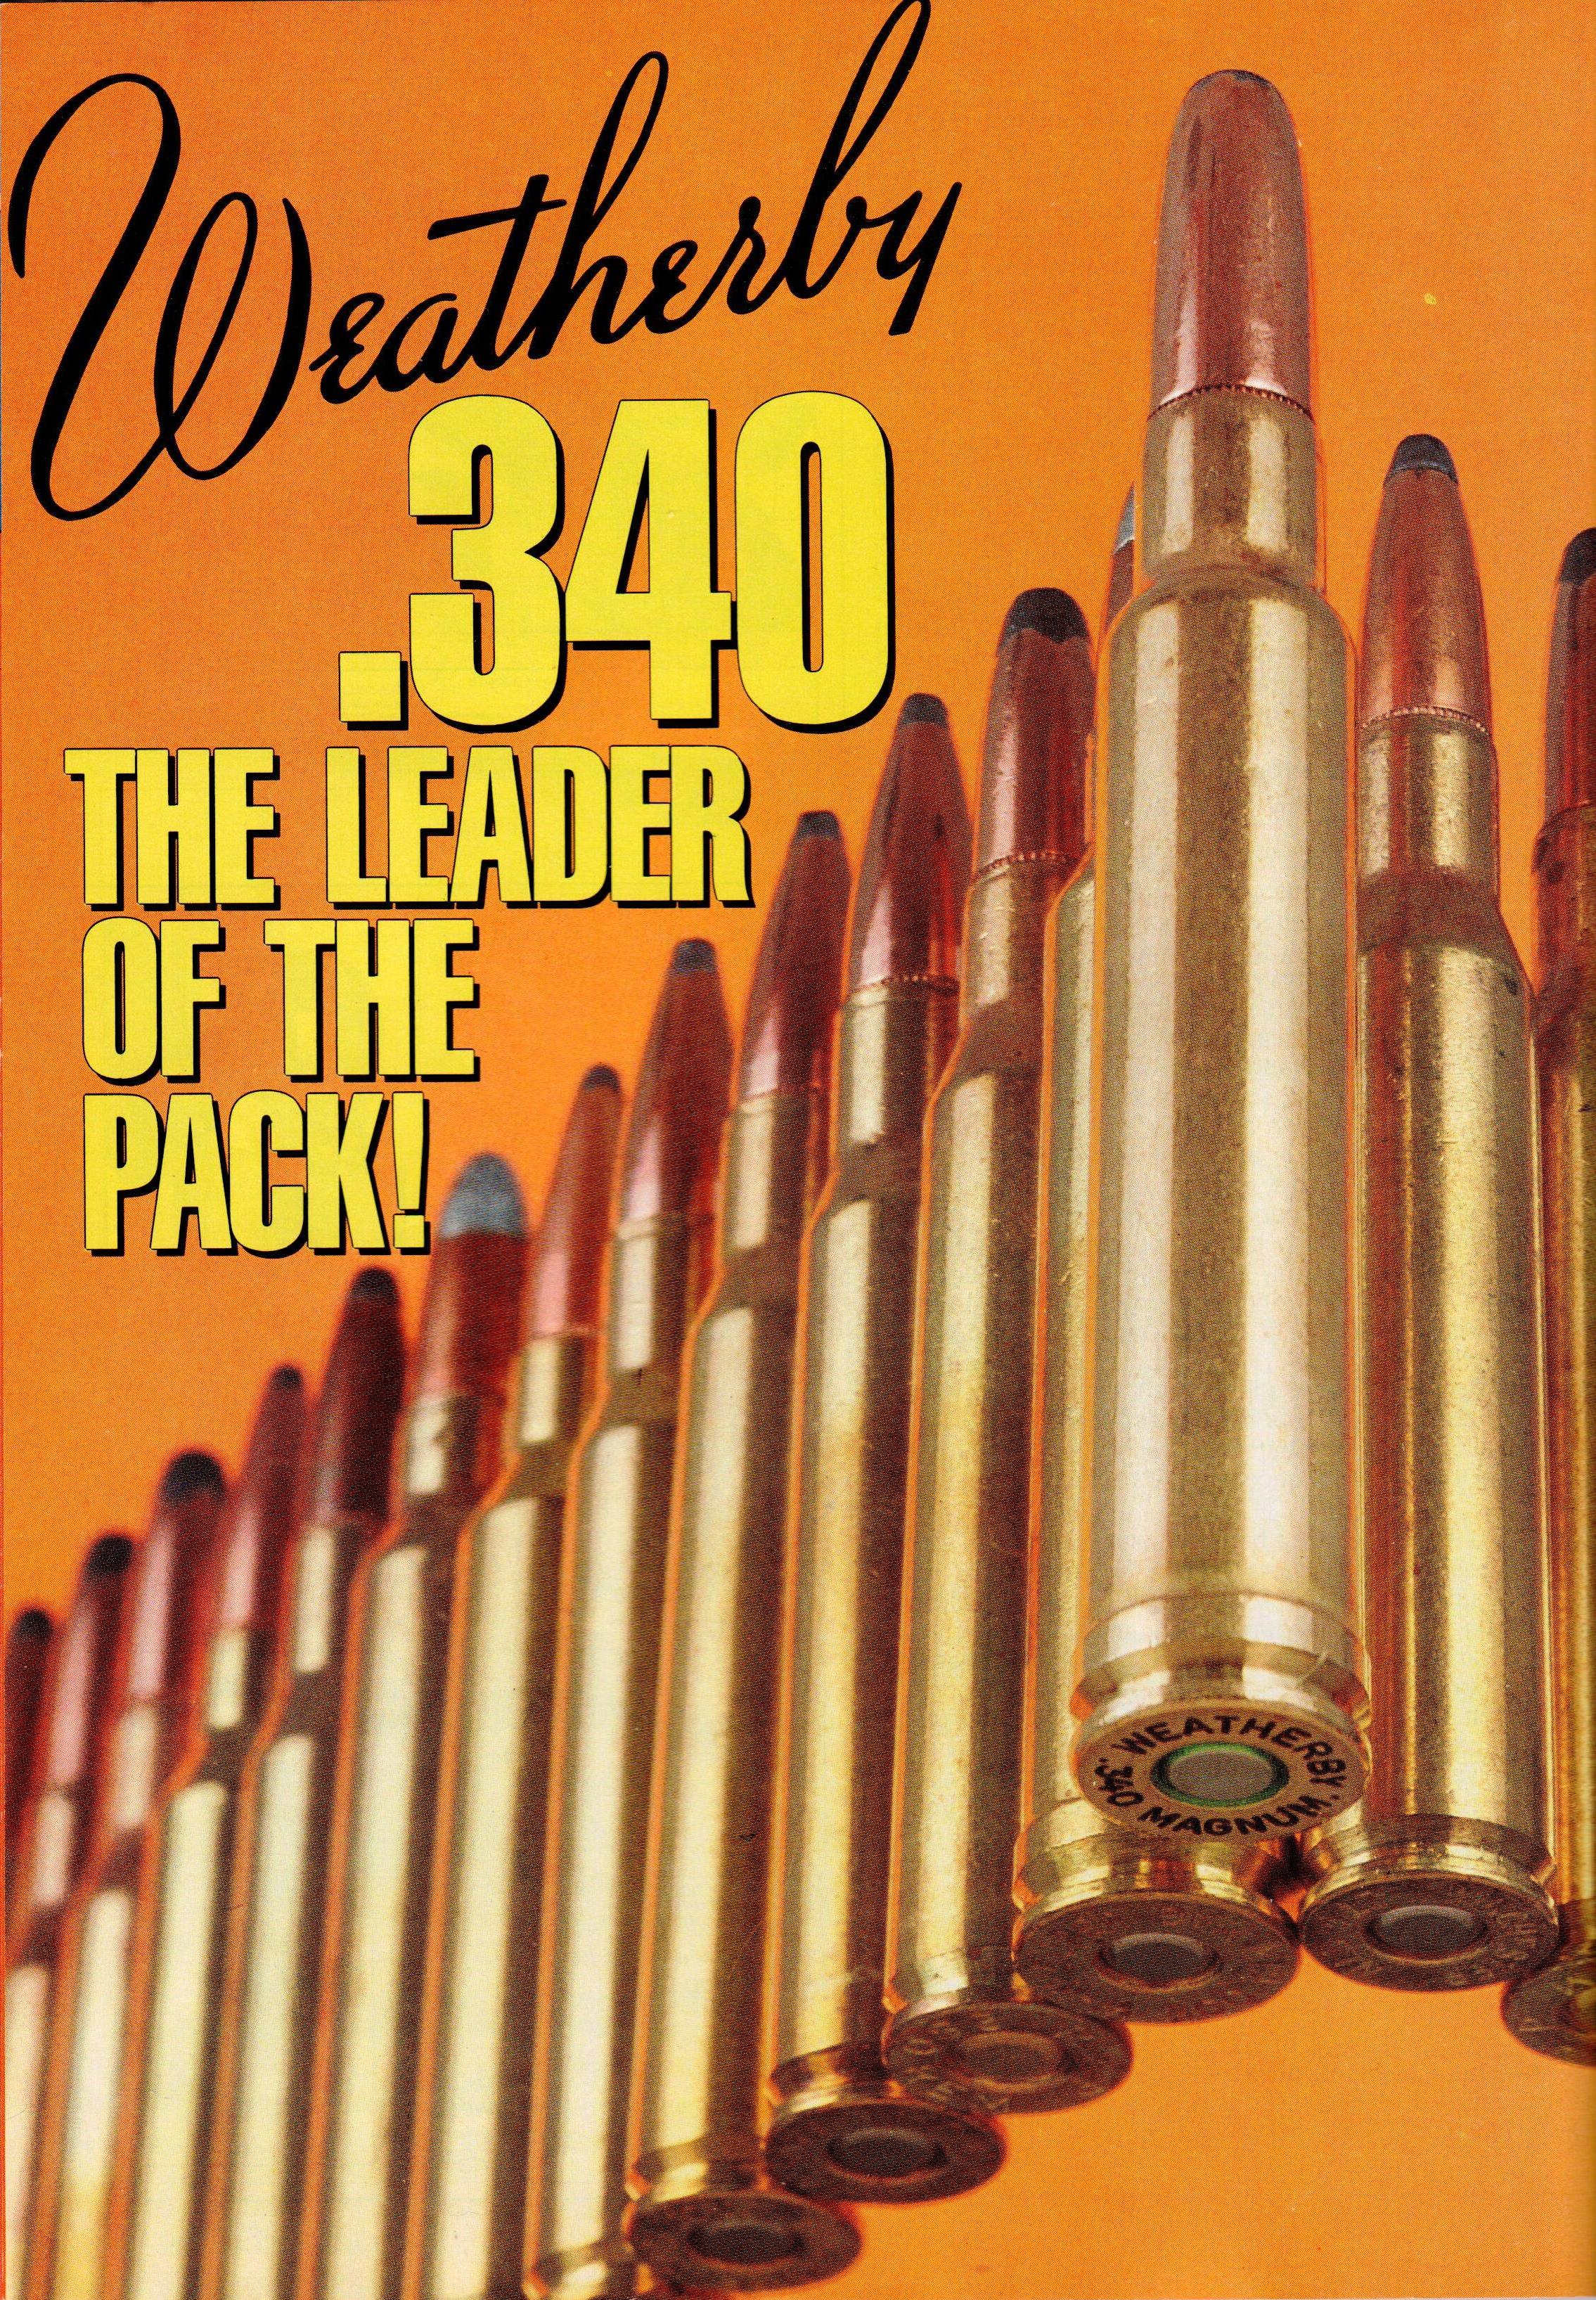 Weatherby .340 - The leader of the pack 2.jpg